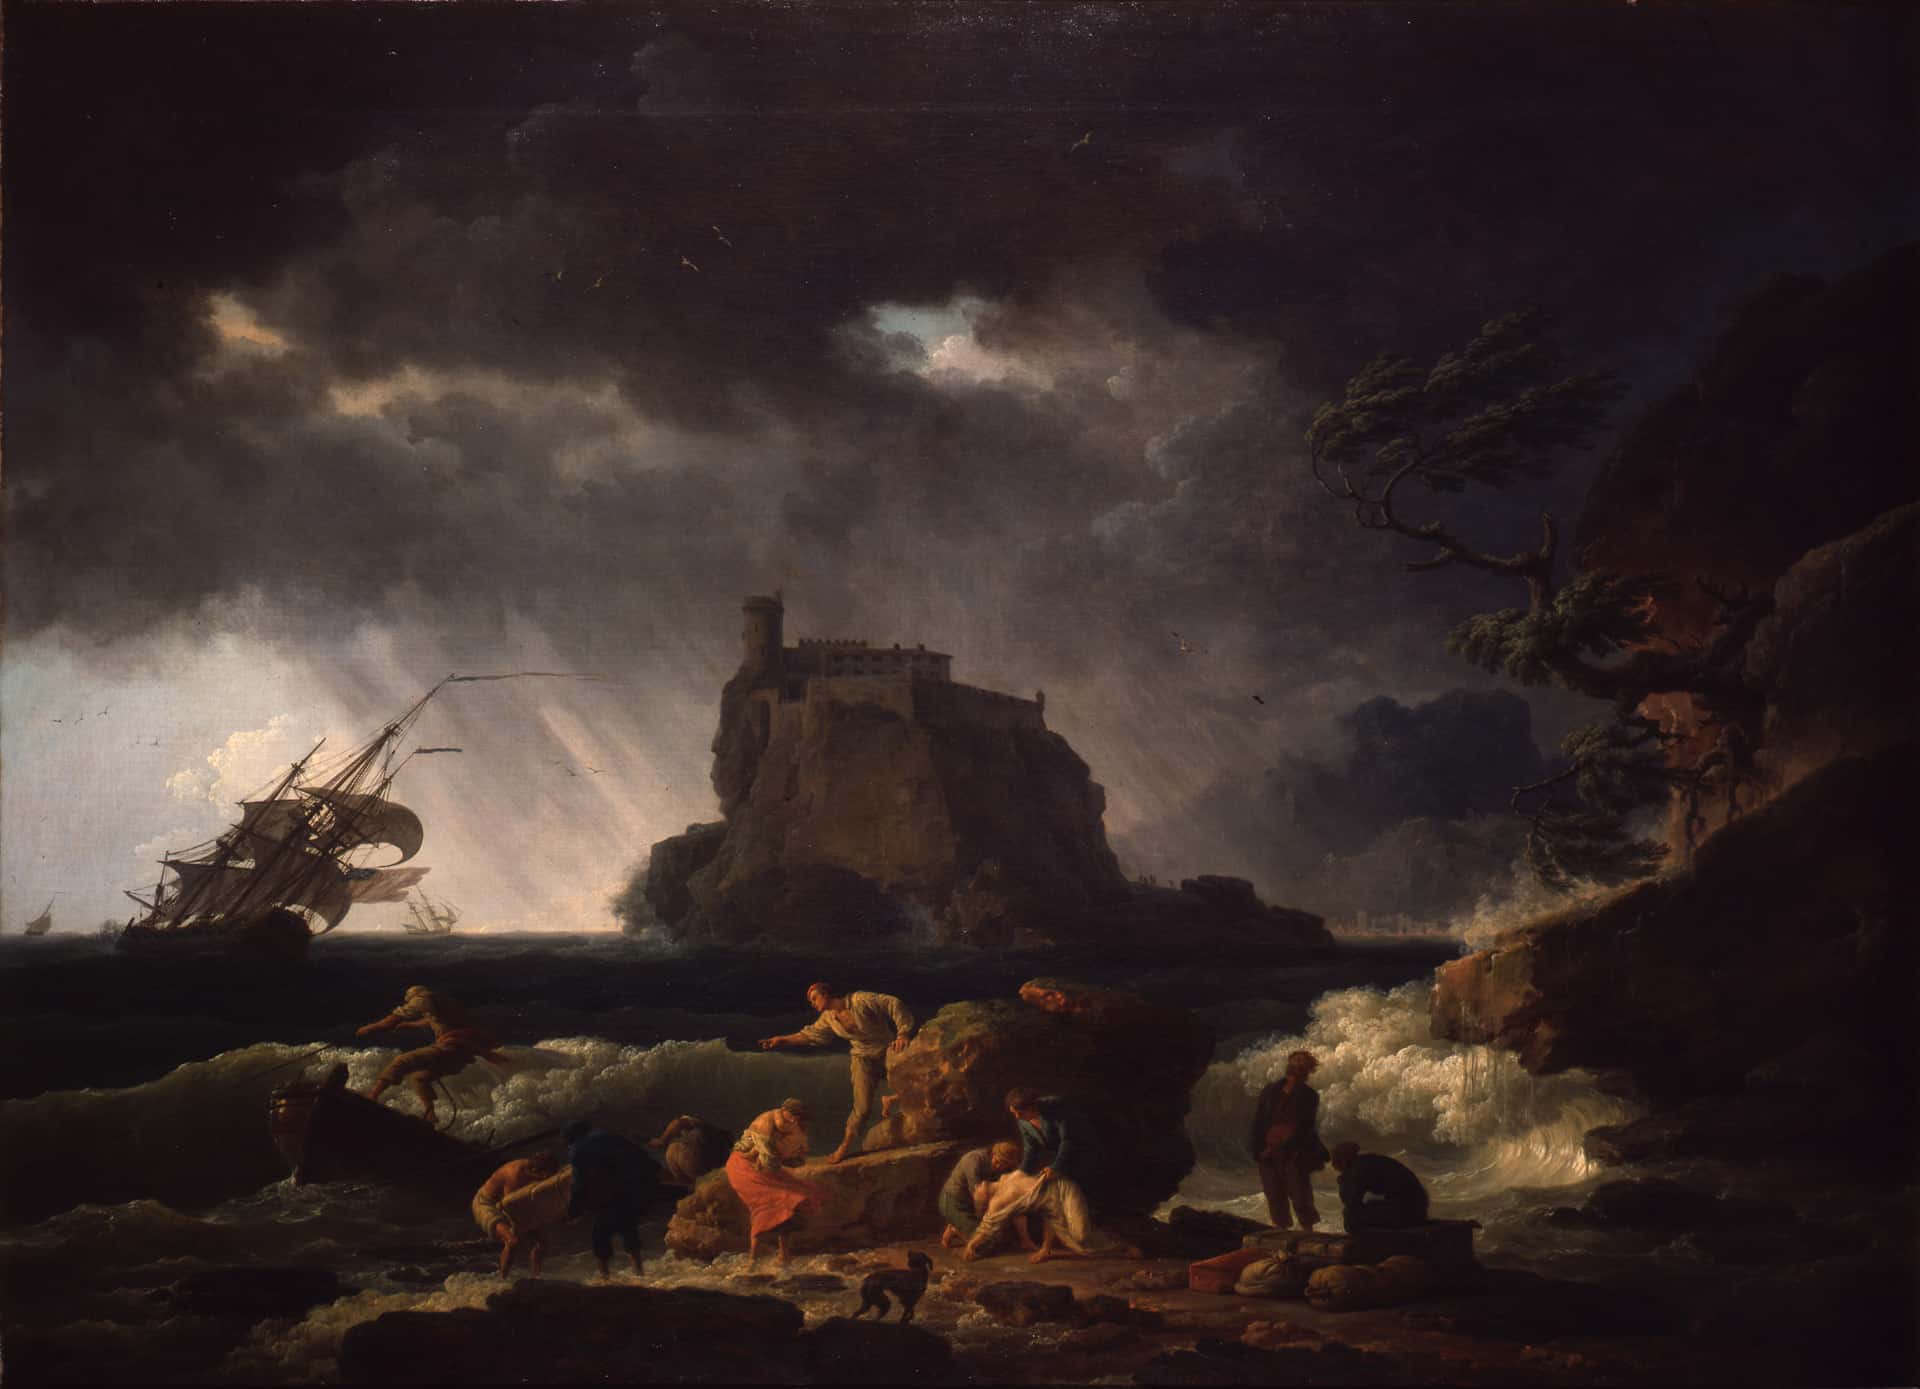 a painting of men pulling a boat to shore in a stormy sea with dark clouds and heavy rains